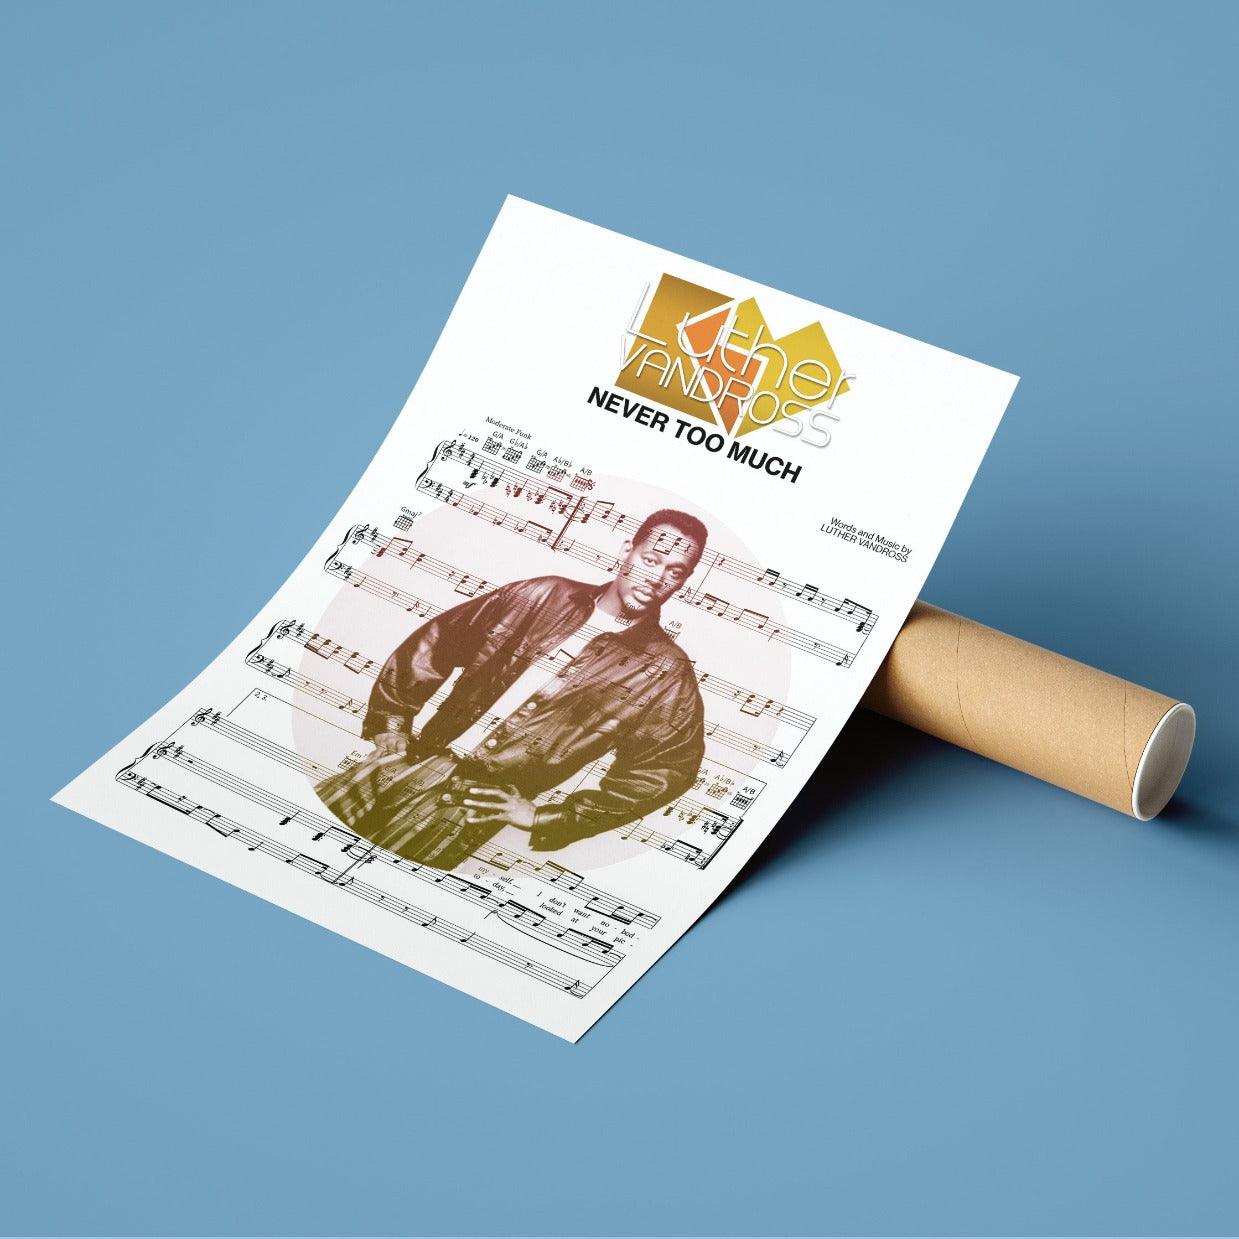 Luther Vandross - Never Too Much Song Music Sheet Notes Print Everyone has a favorite Song lyric prints and with Luther Vandross now you can show the score as printed staff. The personal favorite song lyrics art shows the song chosen as the score.